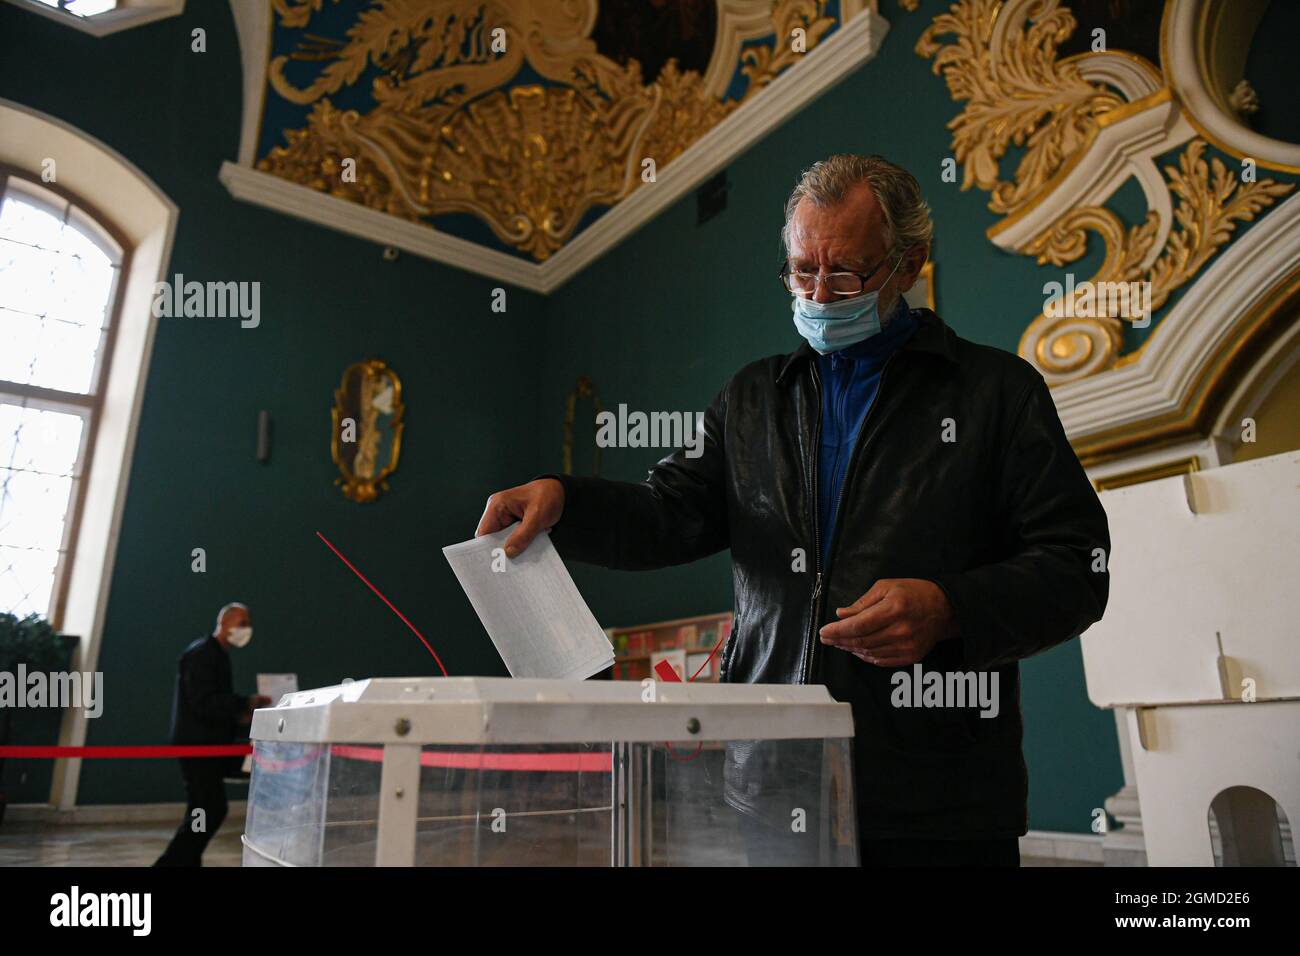 Moscow, Russia. 17th Sep, 2021. A man casts vote at a polling station for the State Duma elections in Moscow, Russia, on Sept. 17, 2021. Russia holds elections for deputies of the State Duma, or the lower house of parliament, on Sept. 17-19. Credit: Evgeny Sinitsyn/Xinhua/Alamy Live News Stock Photo